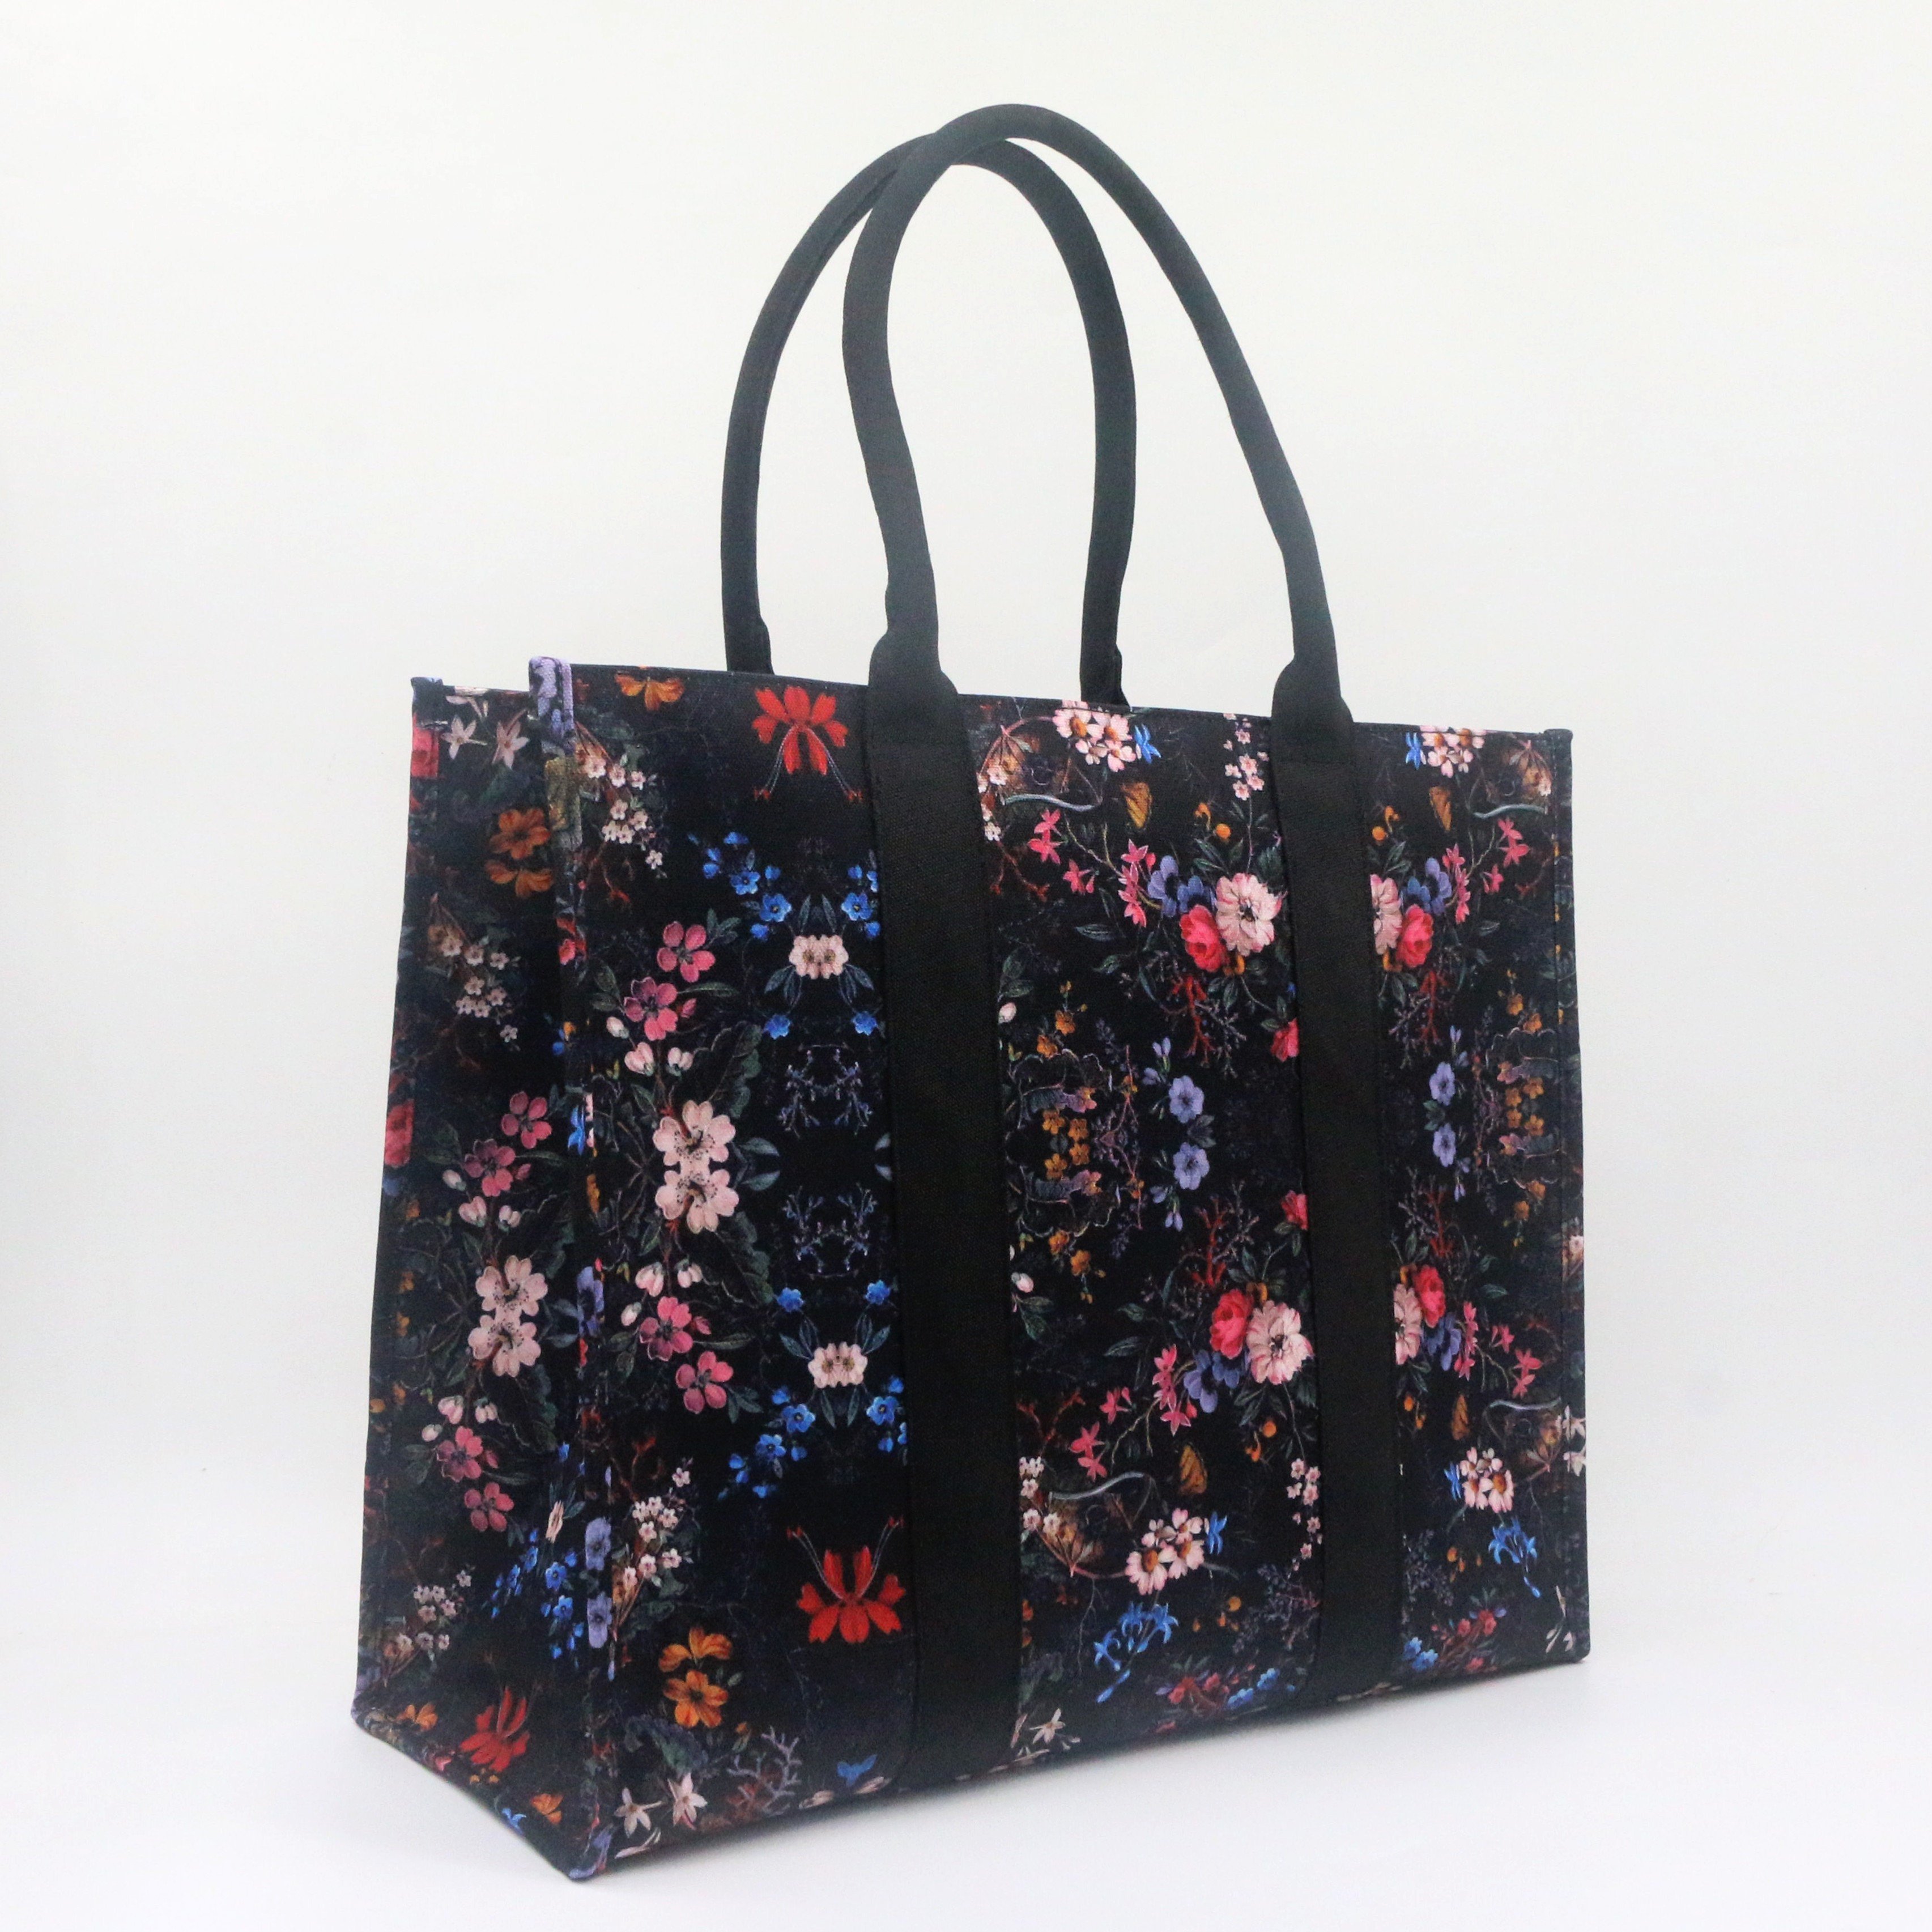 ODM Vintage Flower Prints Canvas Large Tote Bag Daily Use Fashion Flora Women Lady Tote Grocery Shopping Bag